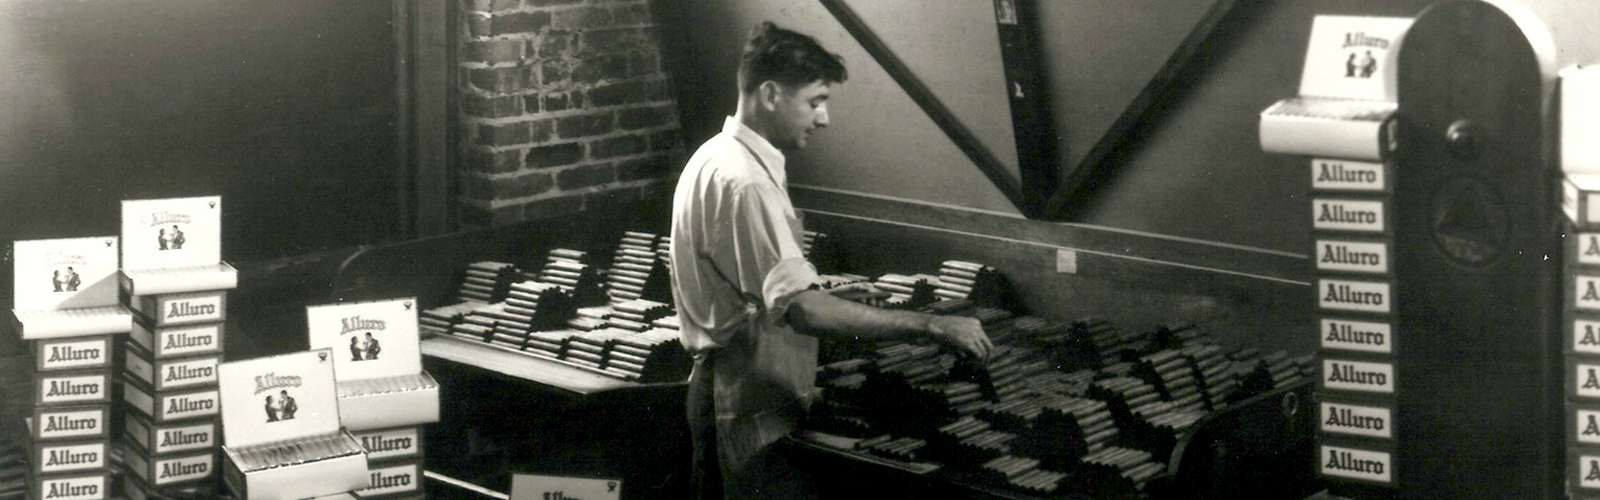 Interior of the Santaella cigar factory showing a worker boxing cigars in 1935.